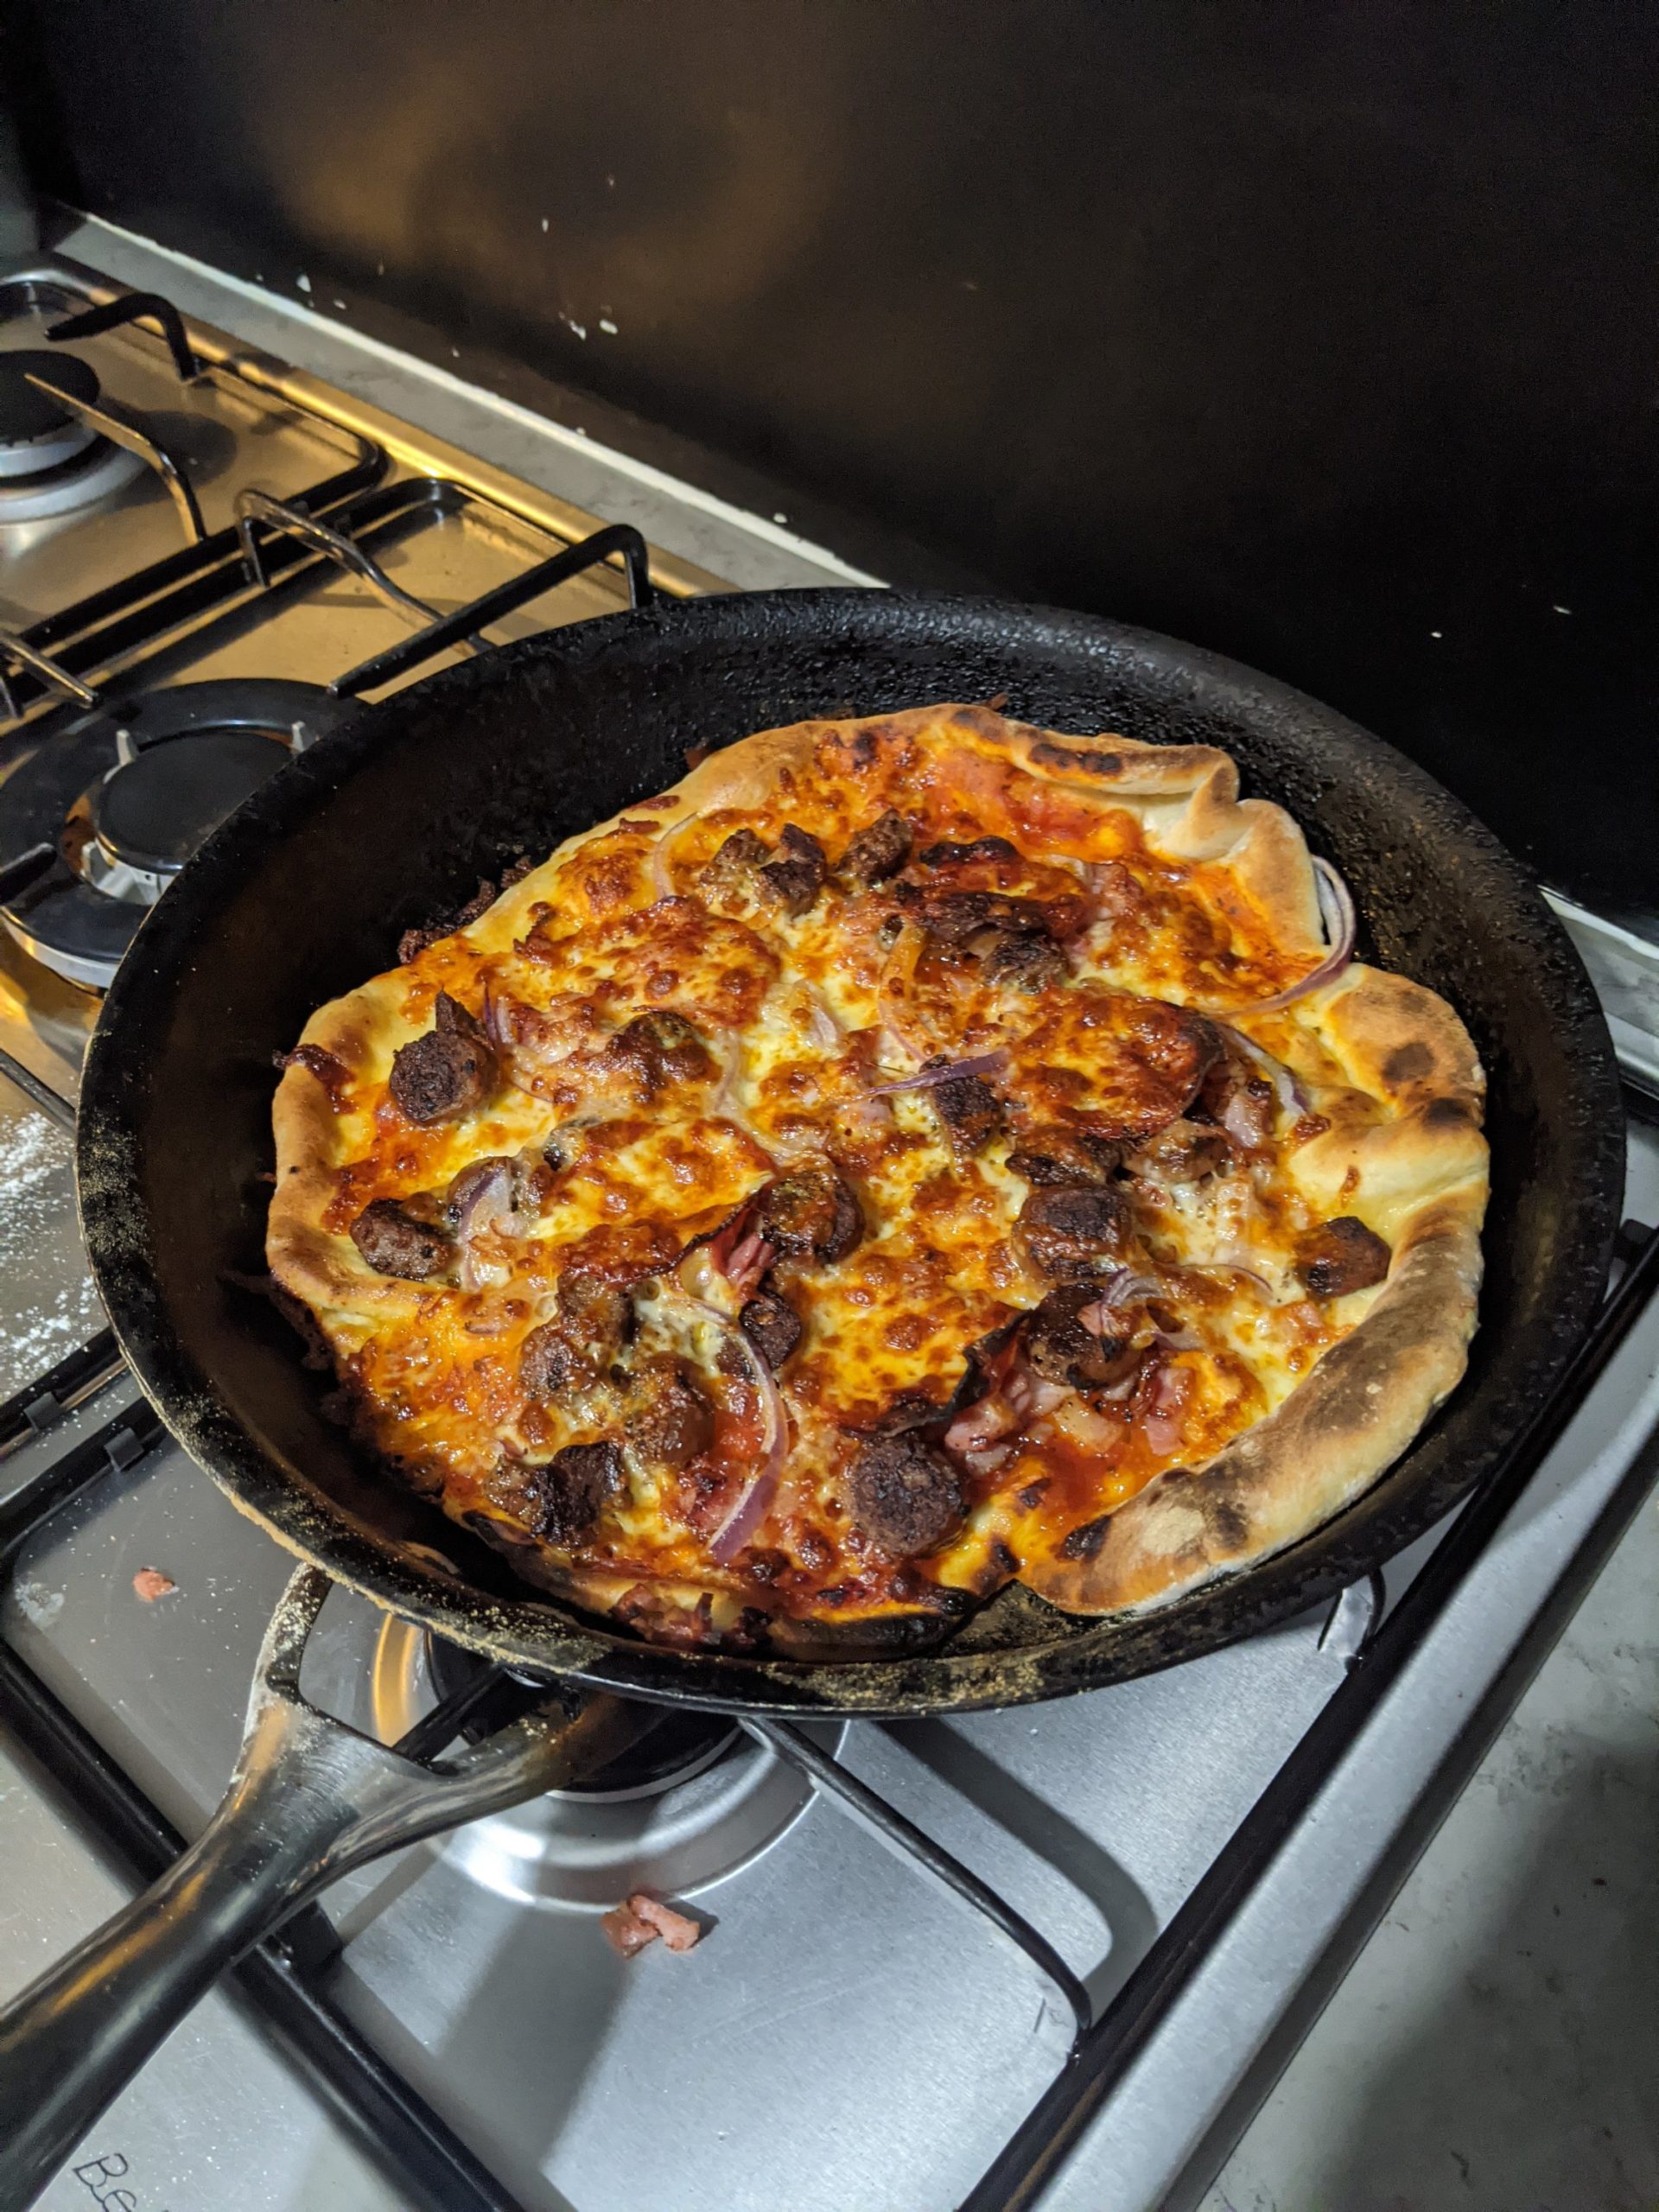 Pan cooked pizza 🍕 3